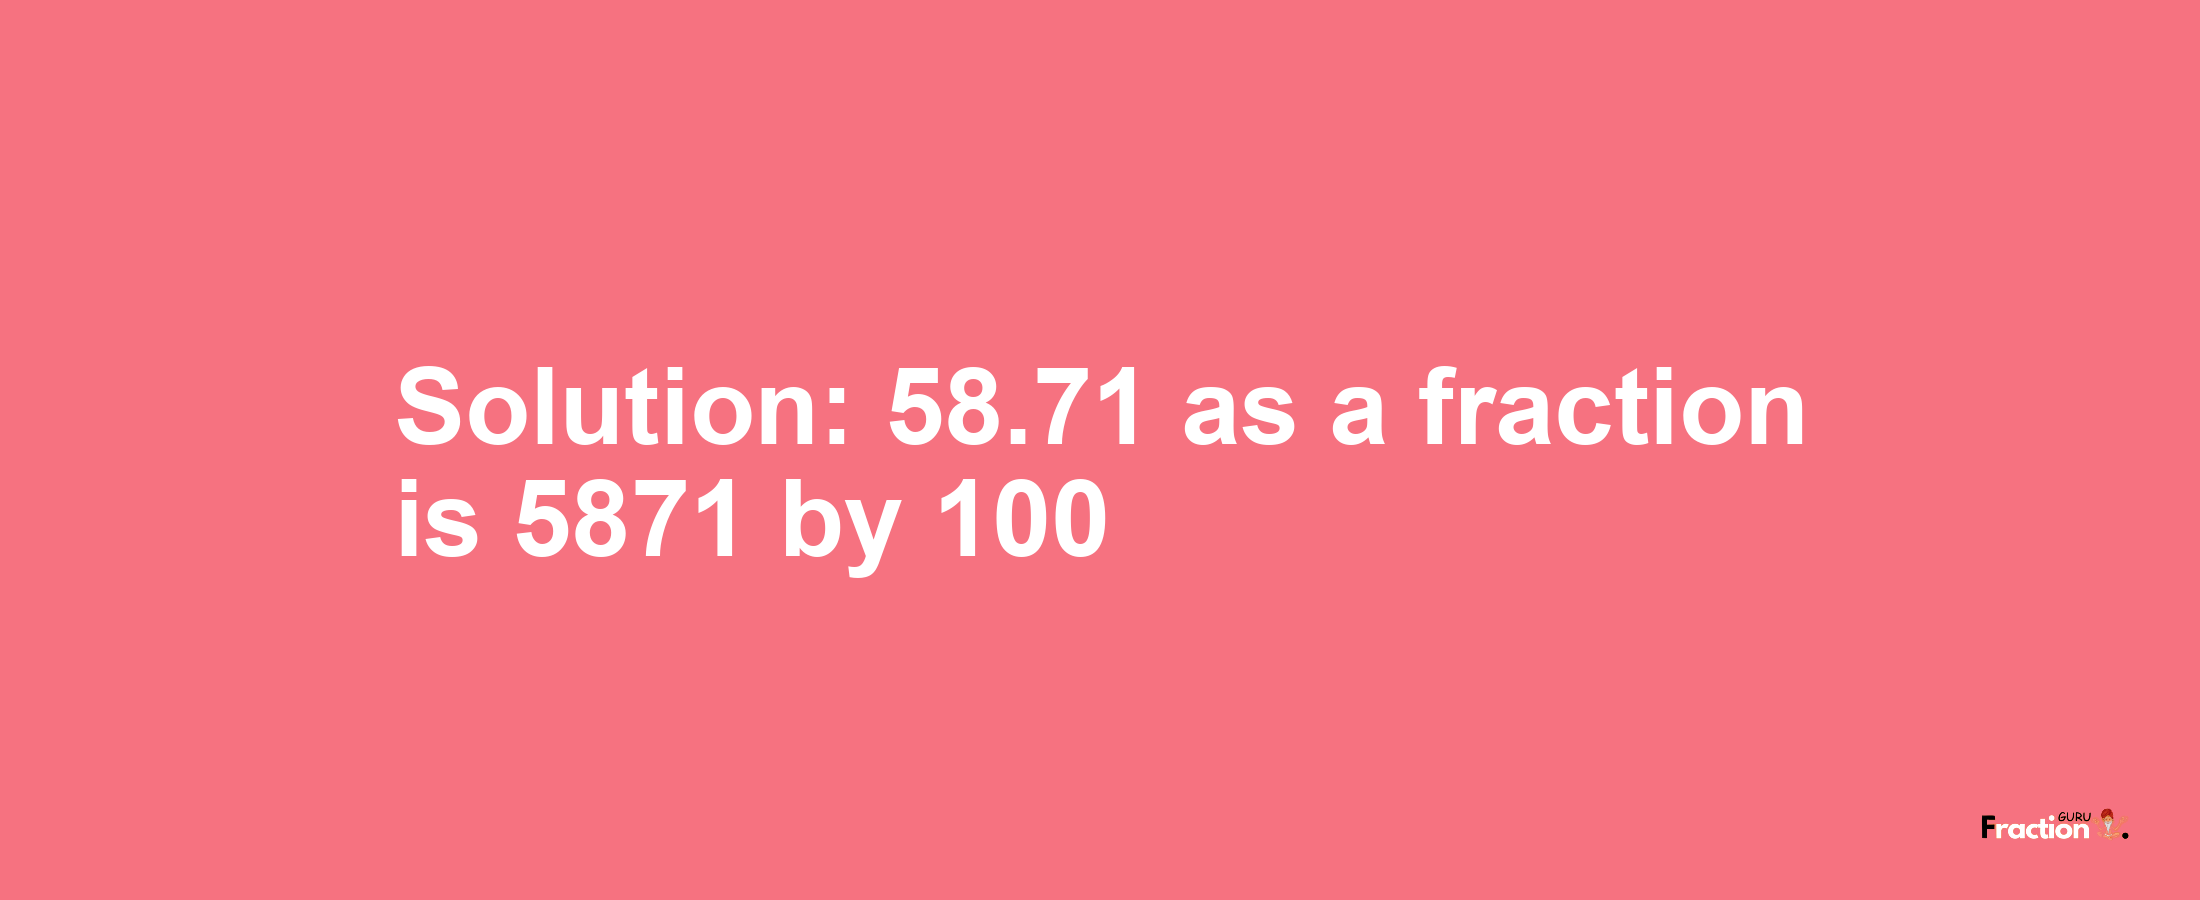 Solution:58.71 as a fraction is 5871/100